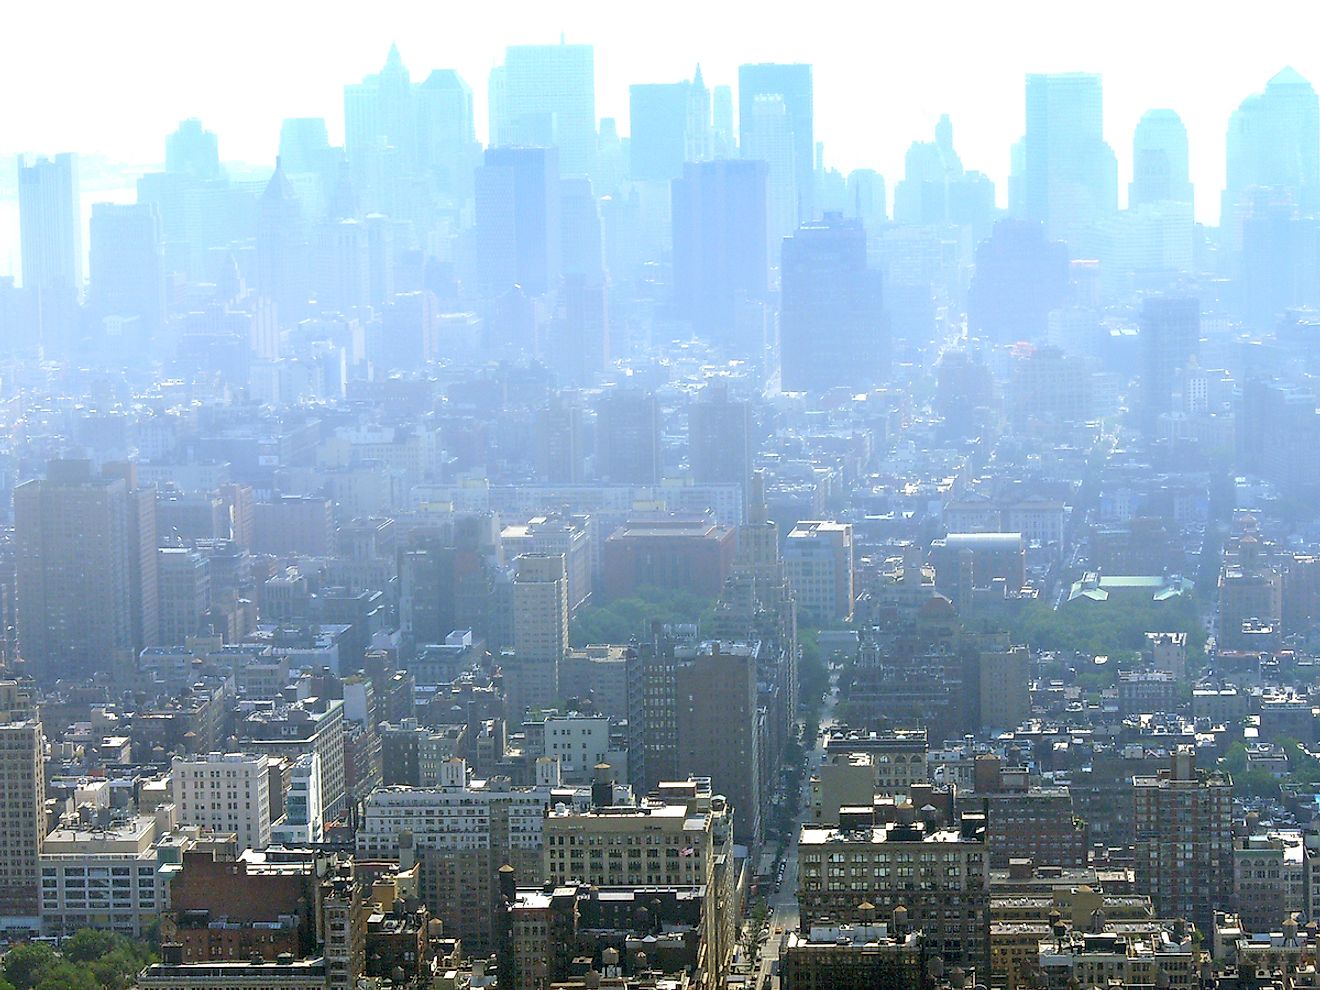 Manhattan's skyscrapers disappearing in the distance under a heavy blanket of smog and haze due to pollution. Image credit: KishoreJ/Shutterstock.com